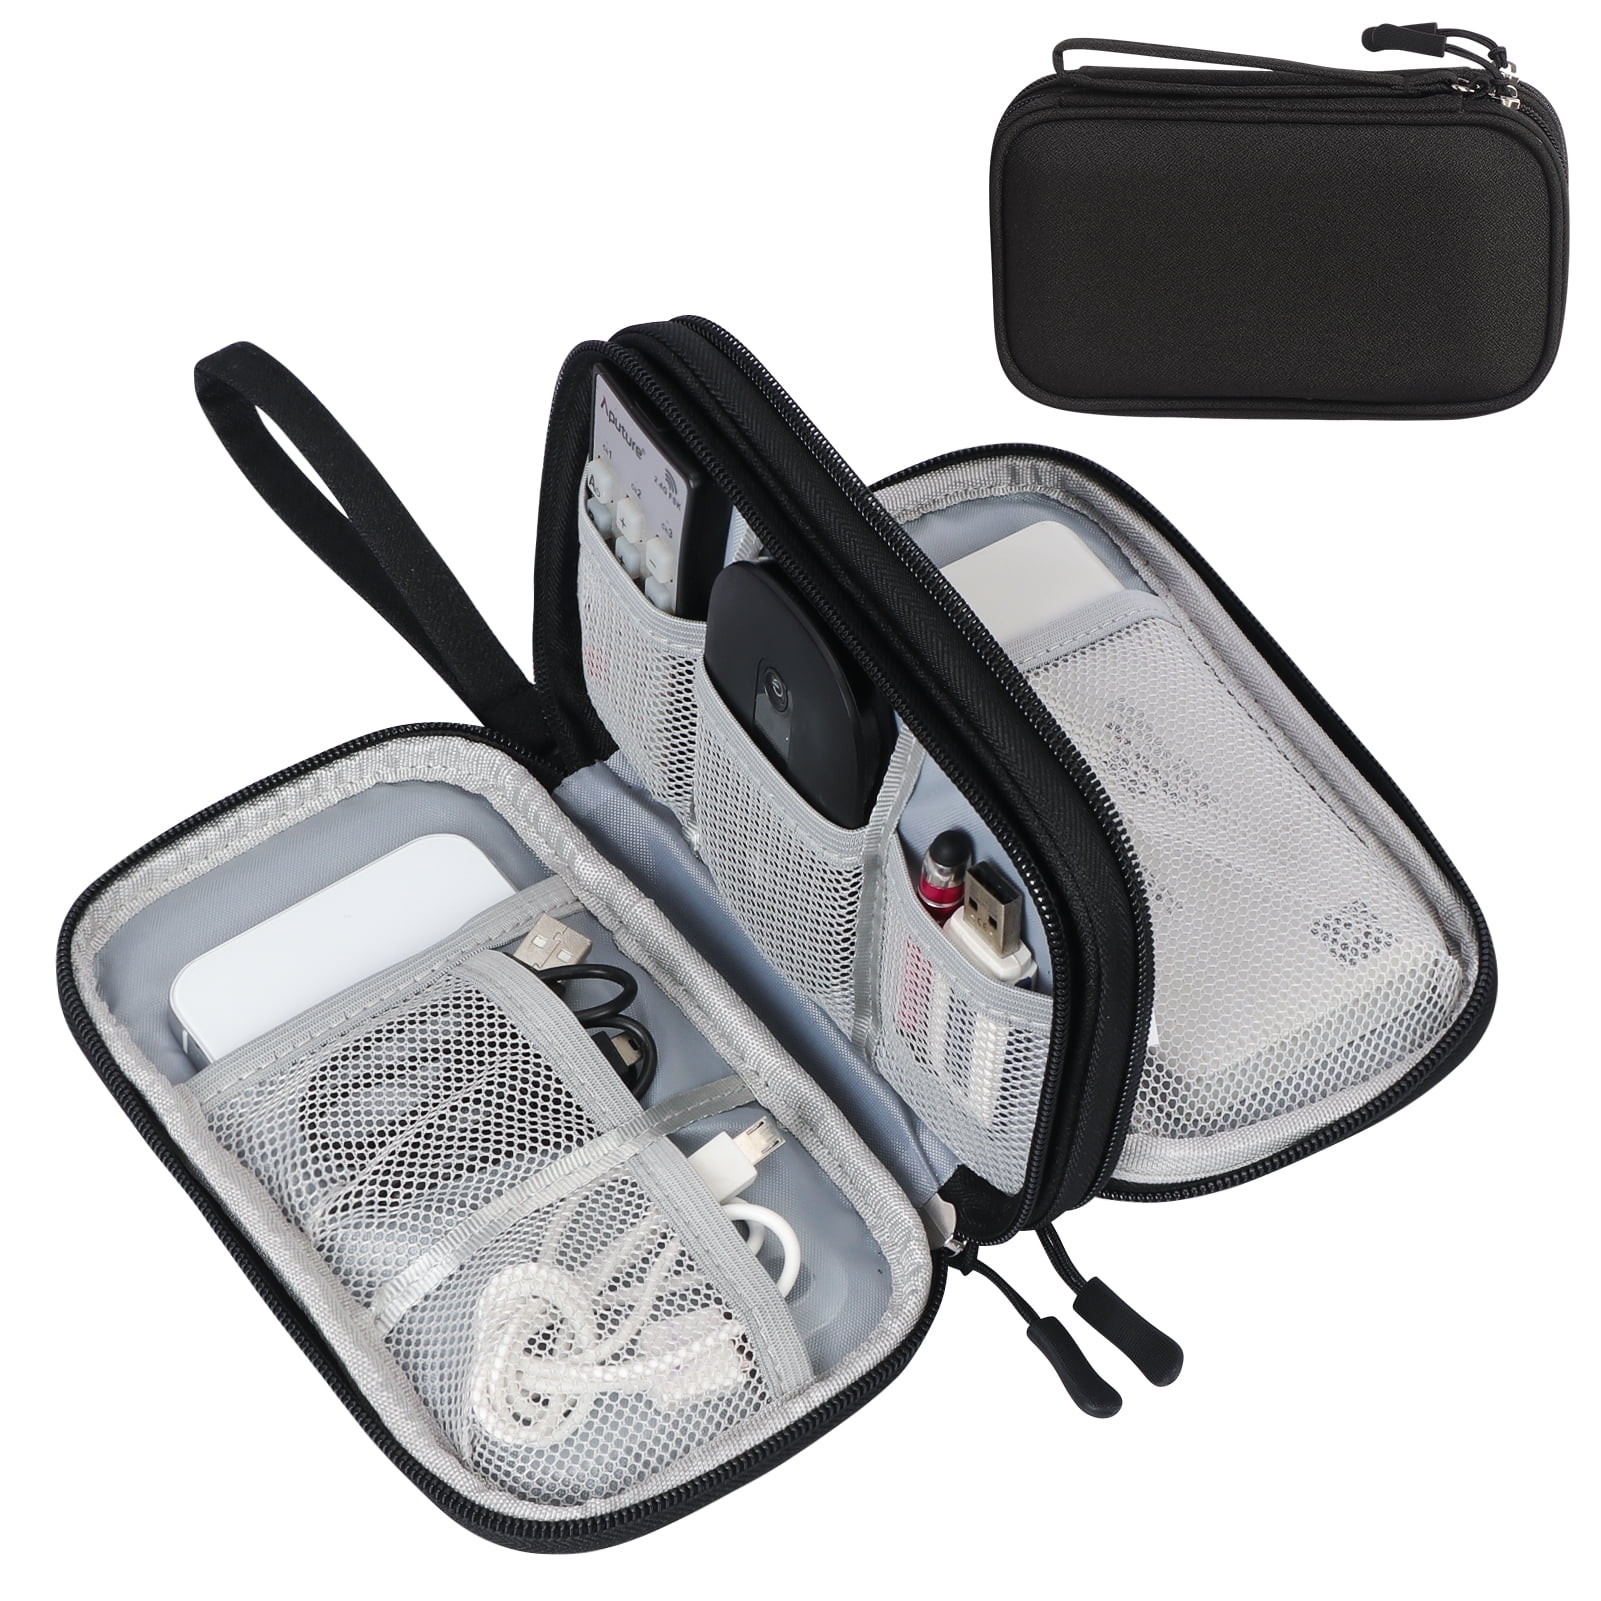 Electronics Accessories Organizer Travel Storage Hand Bags Cable USB Drive Ca %F 